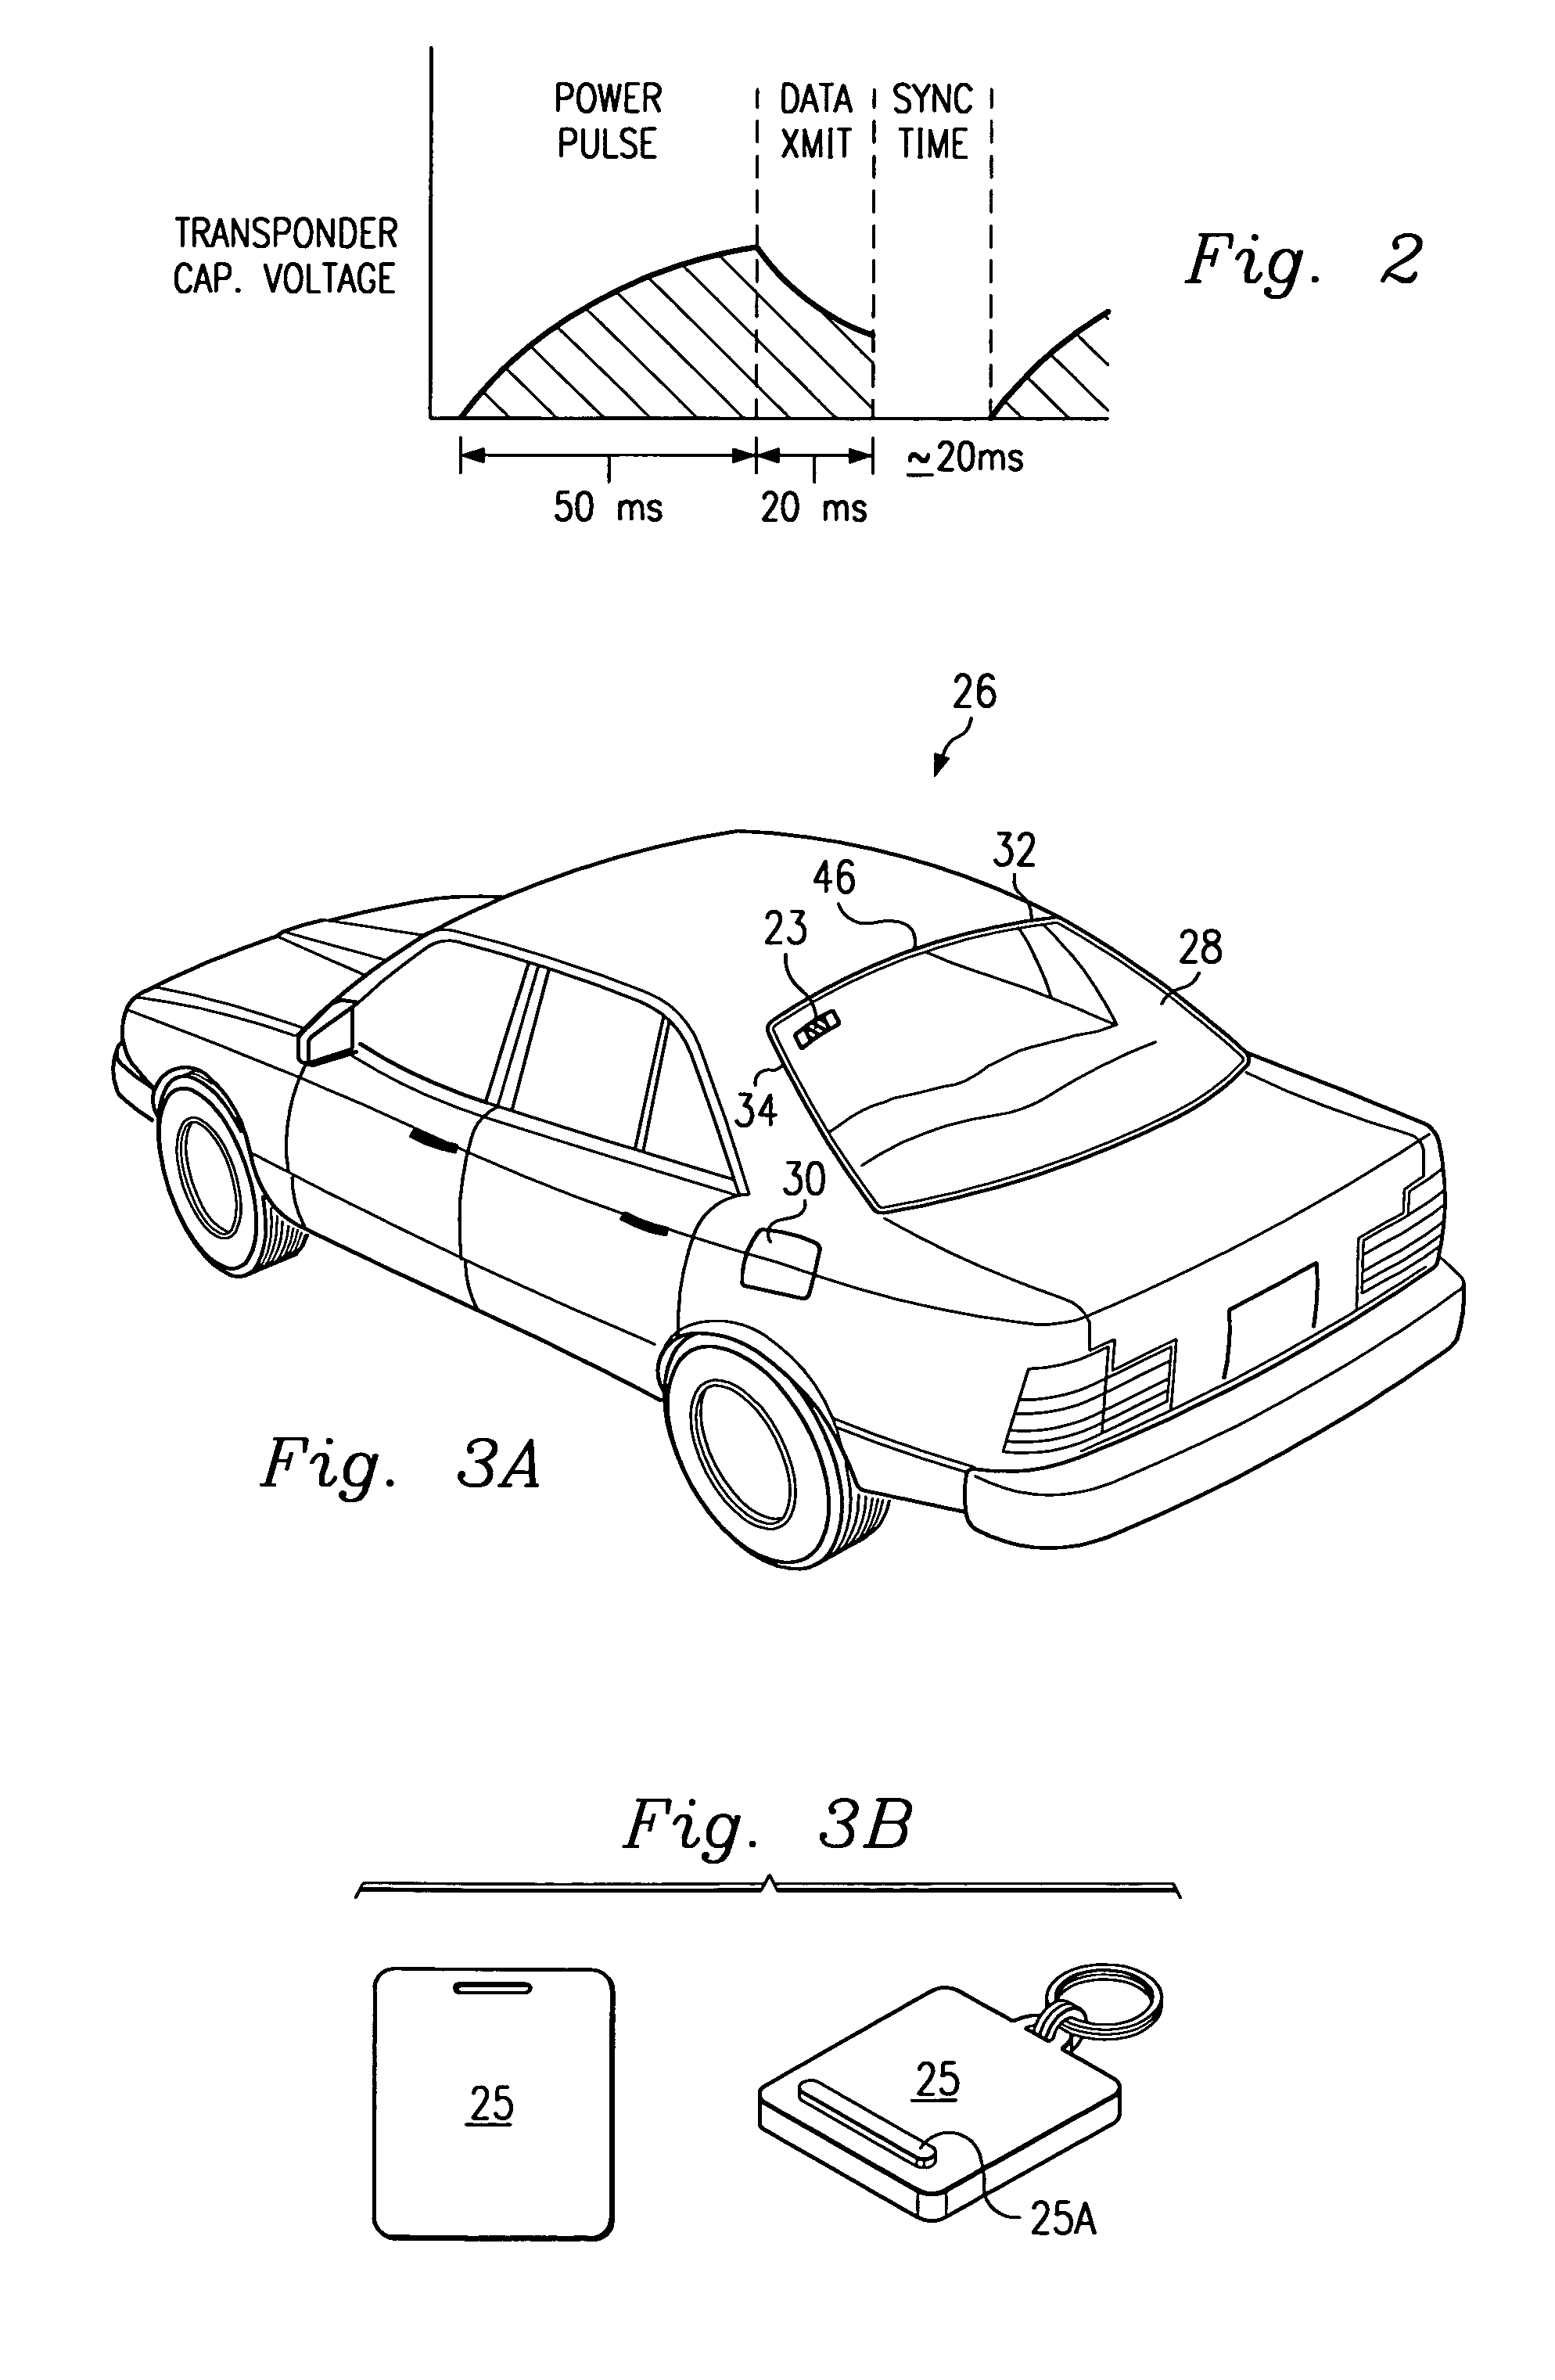 Dispensing system and method with radio frequency customer identification